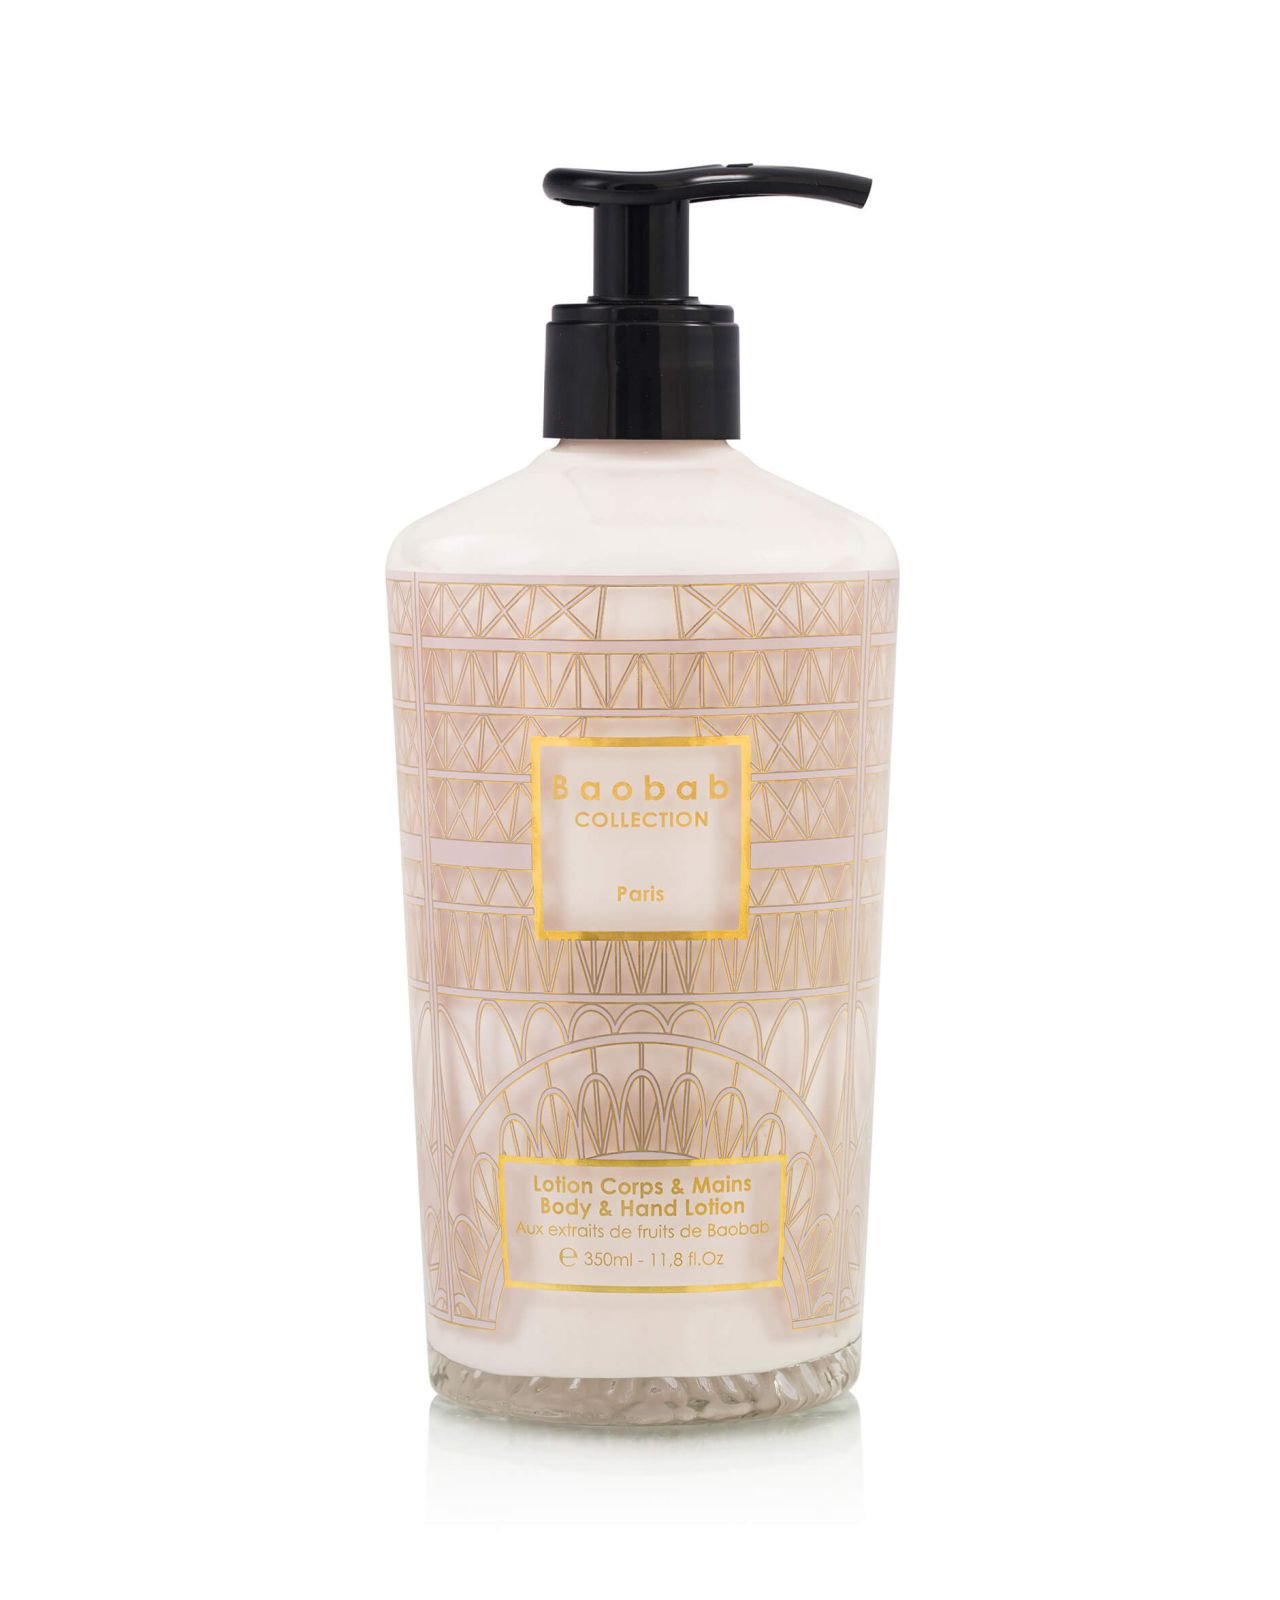 Paris Hand and Body Lotion